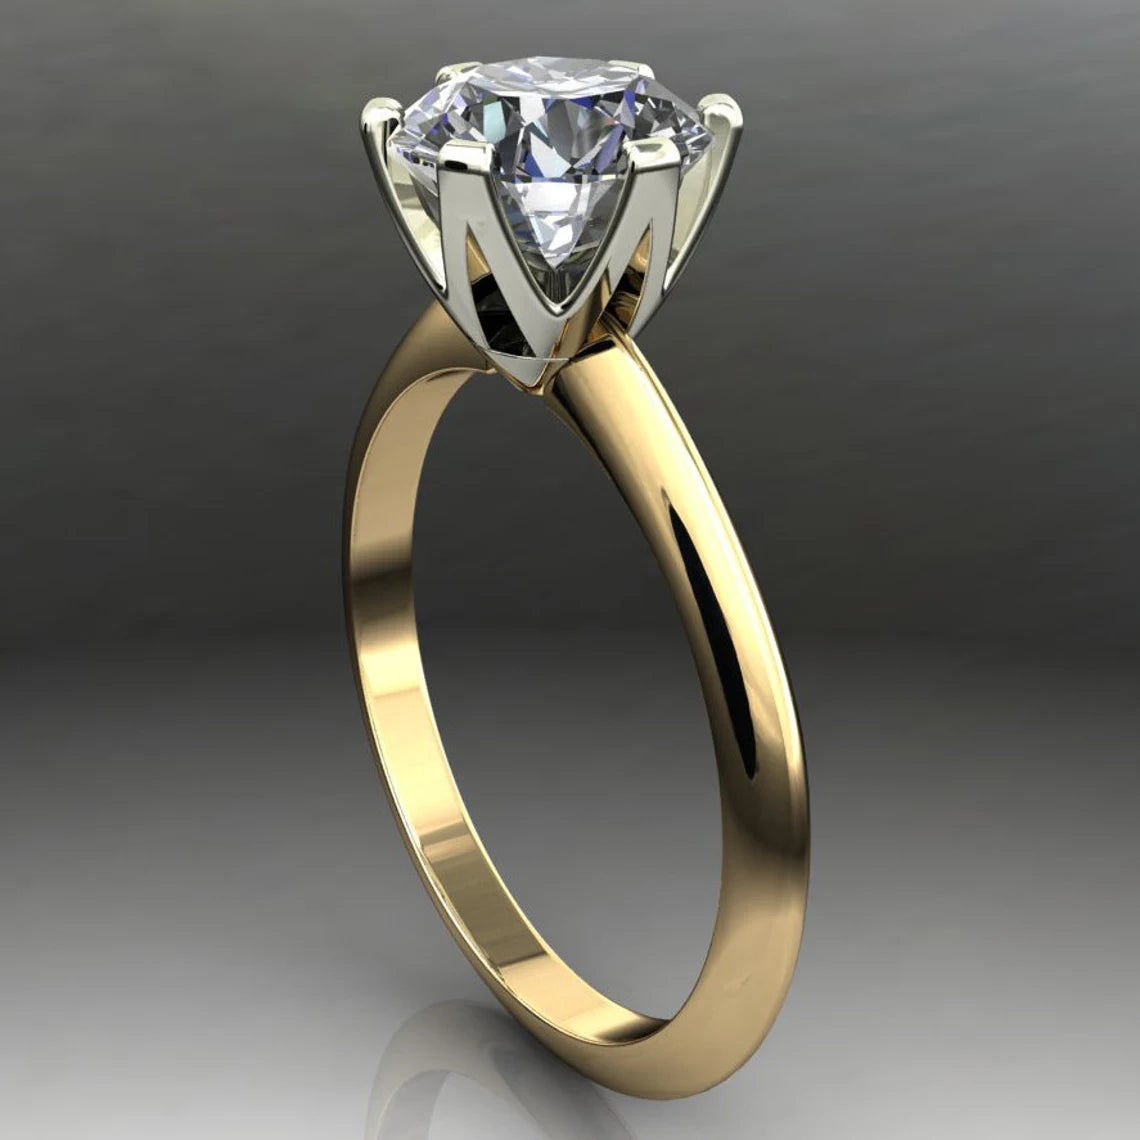 isabelle ring - 1 carat diamond cut round NEO moissanite engagement ring, two tone engagement ring - J Hollywood Designs